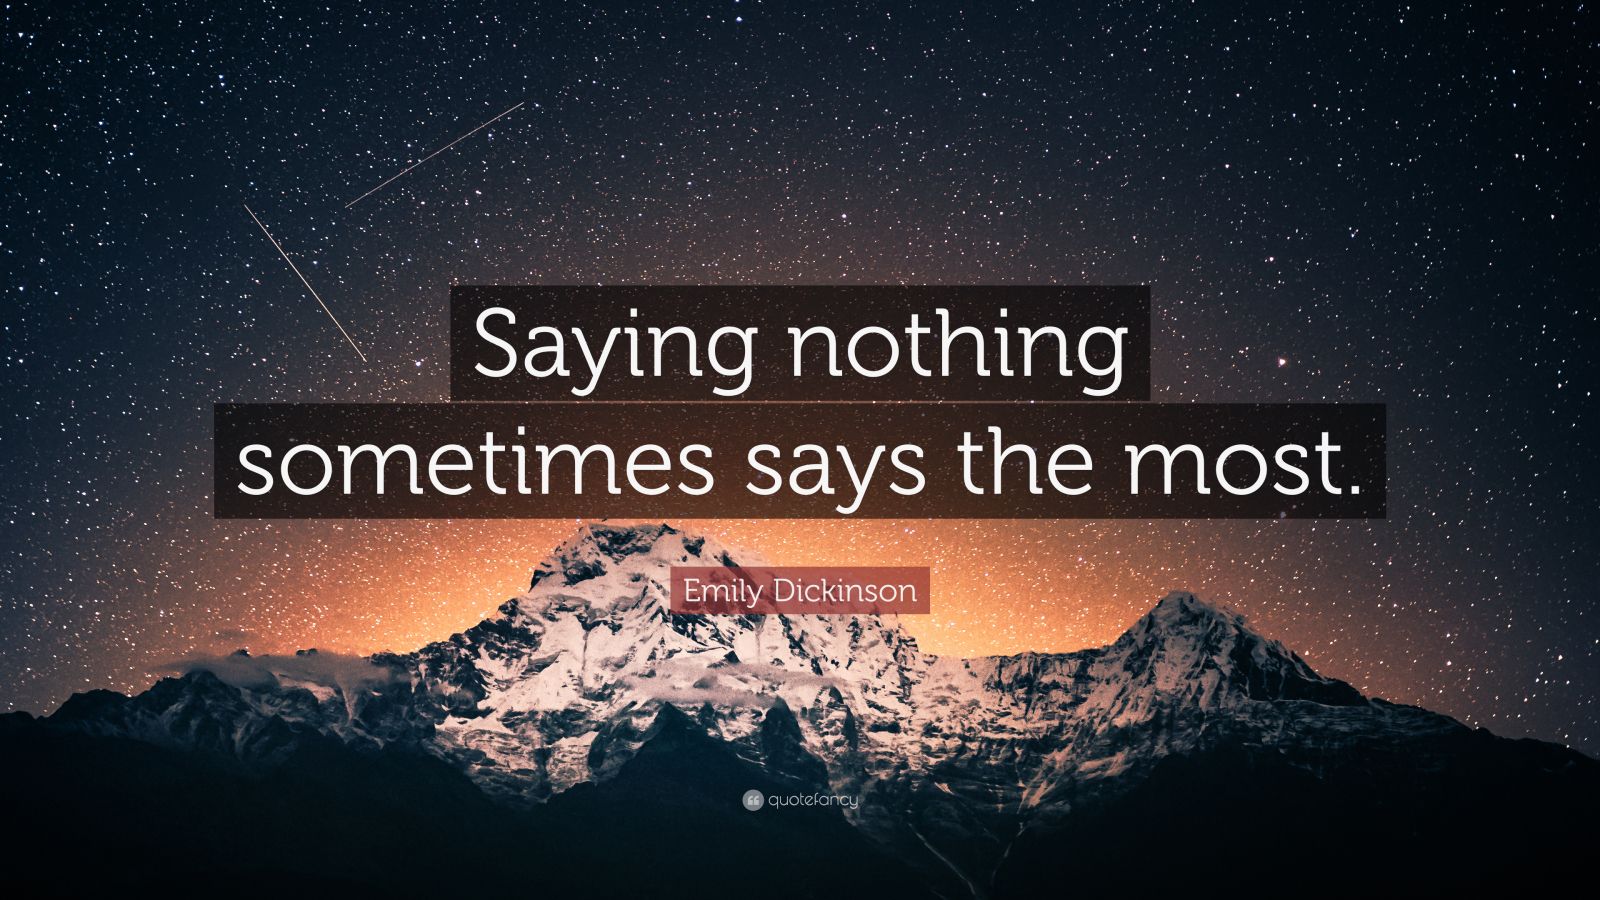 Emily Dickinson Quote: “Saying nothing sometimes says the most.” (12